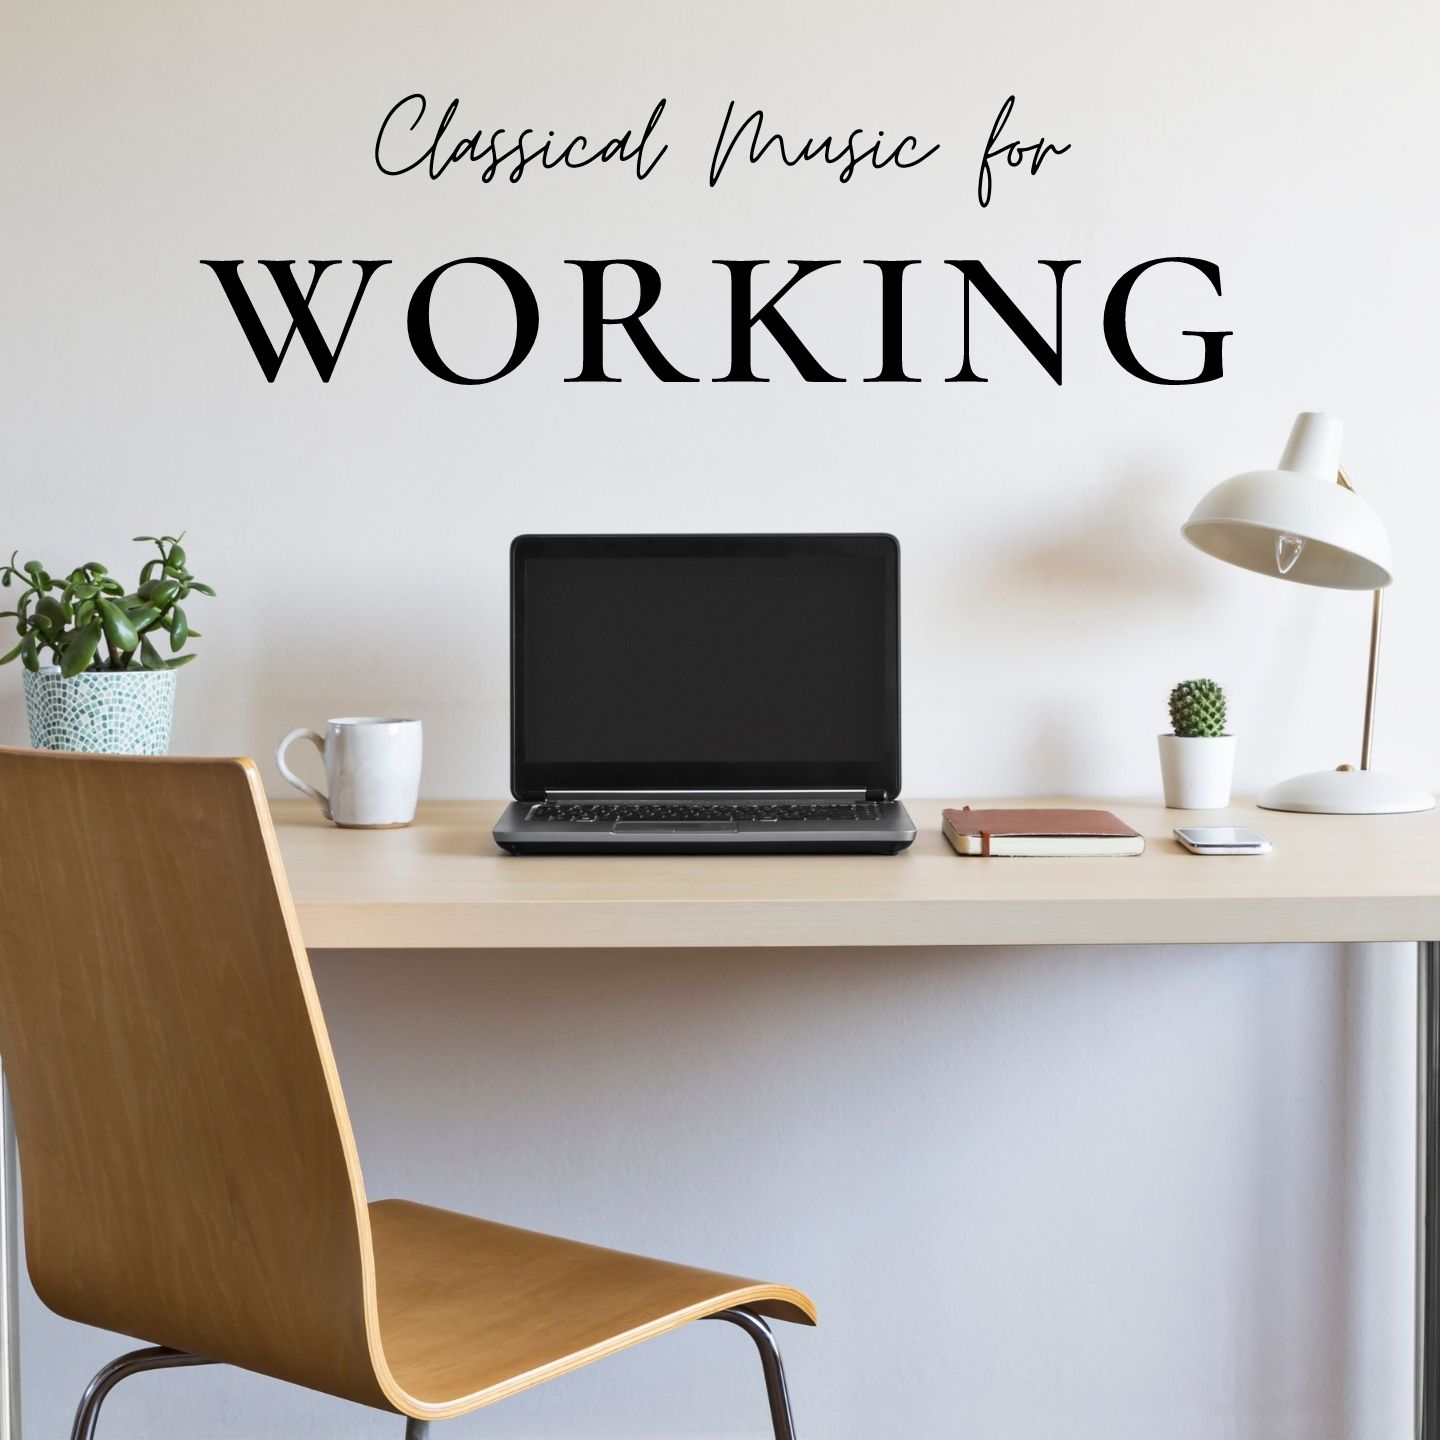 Classical Music for Working